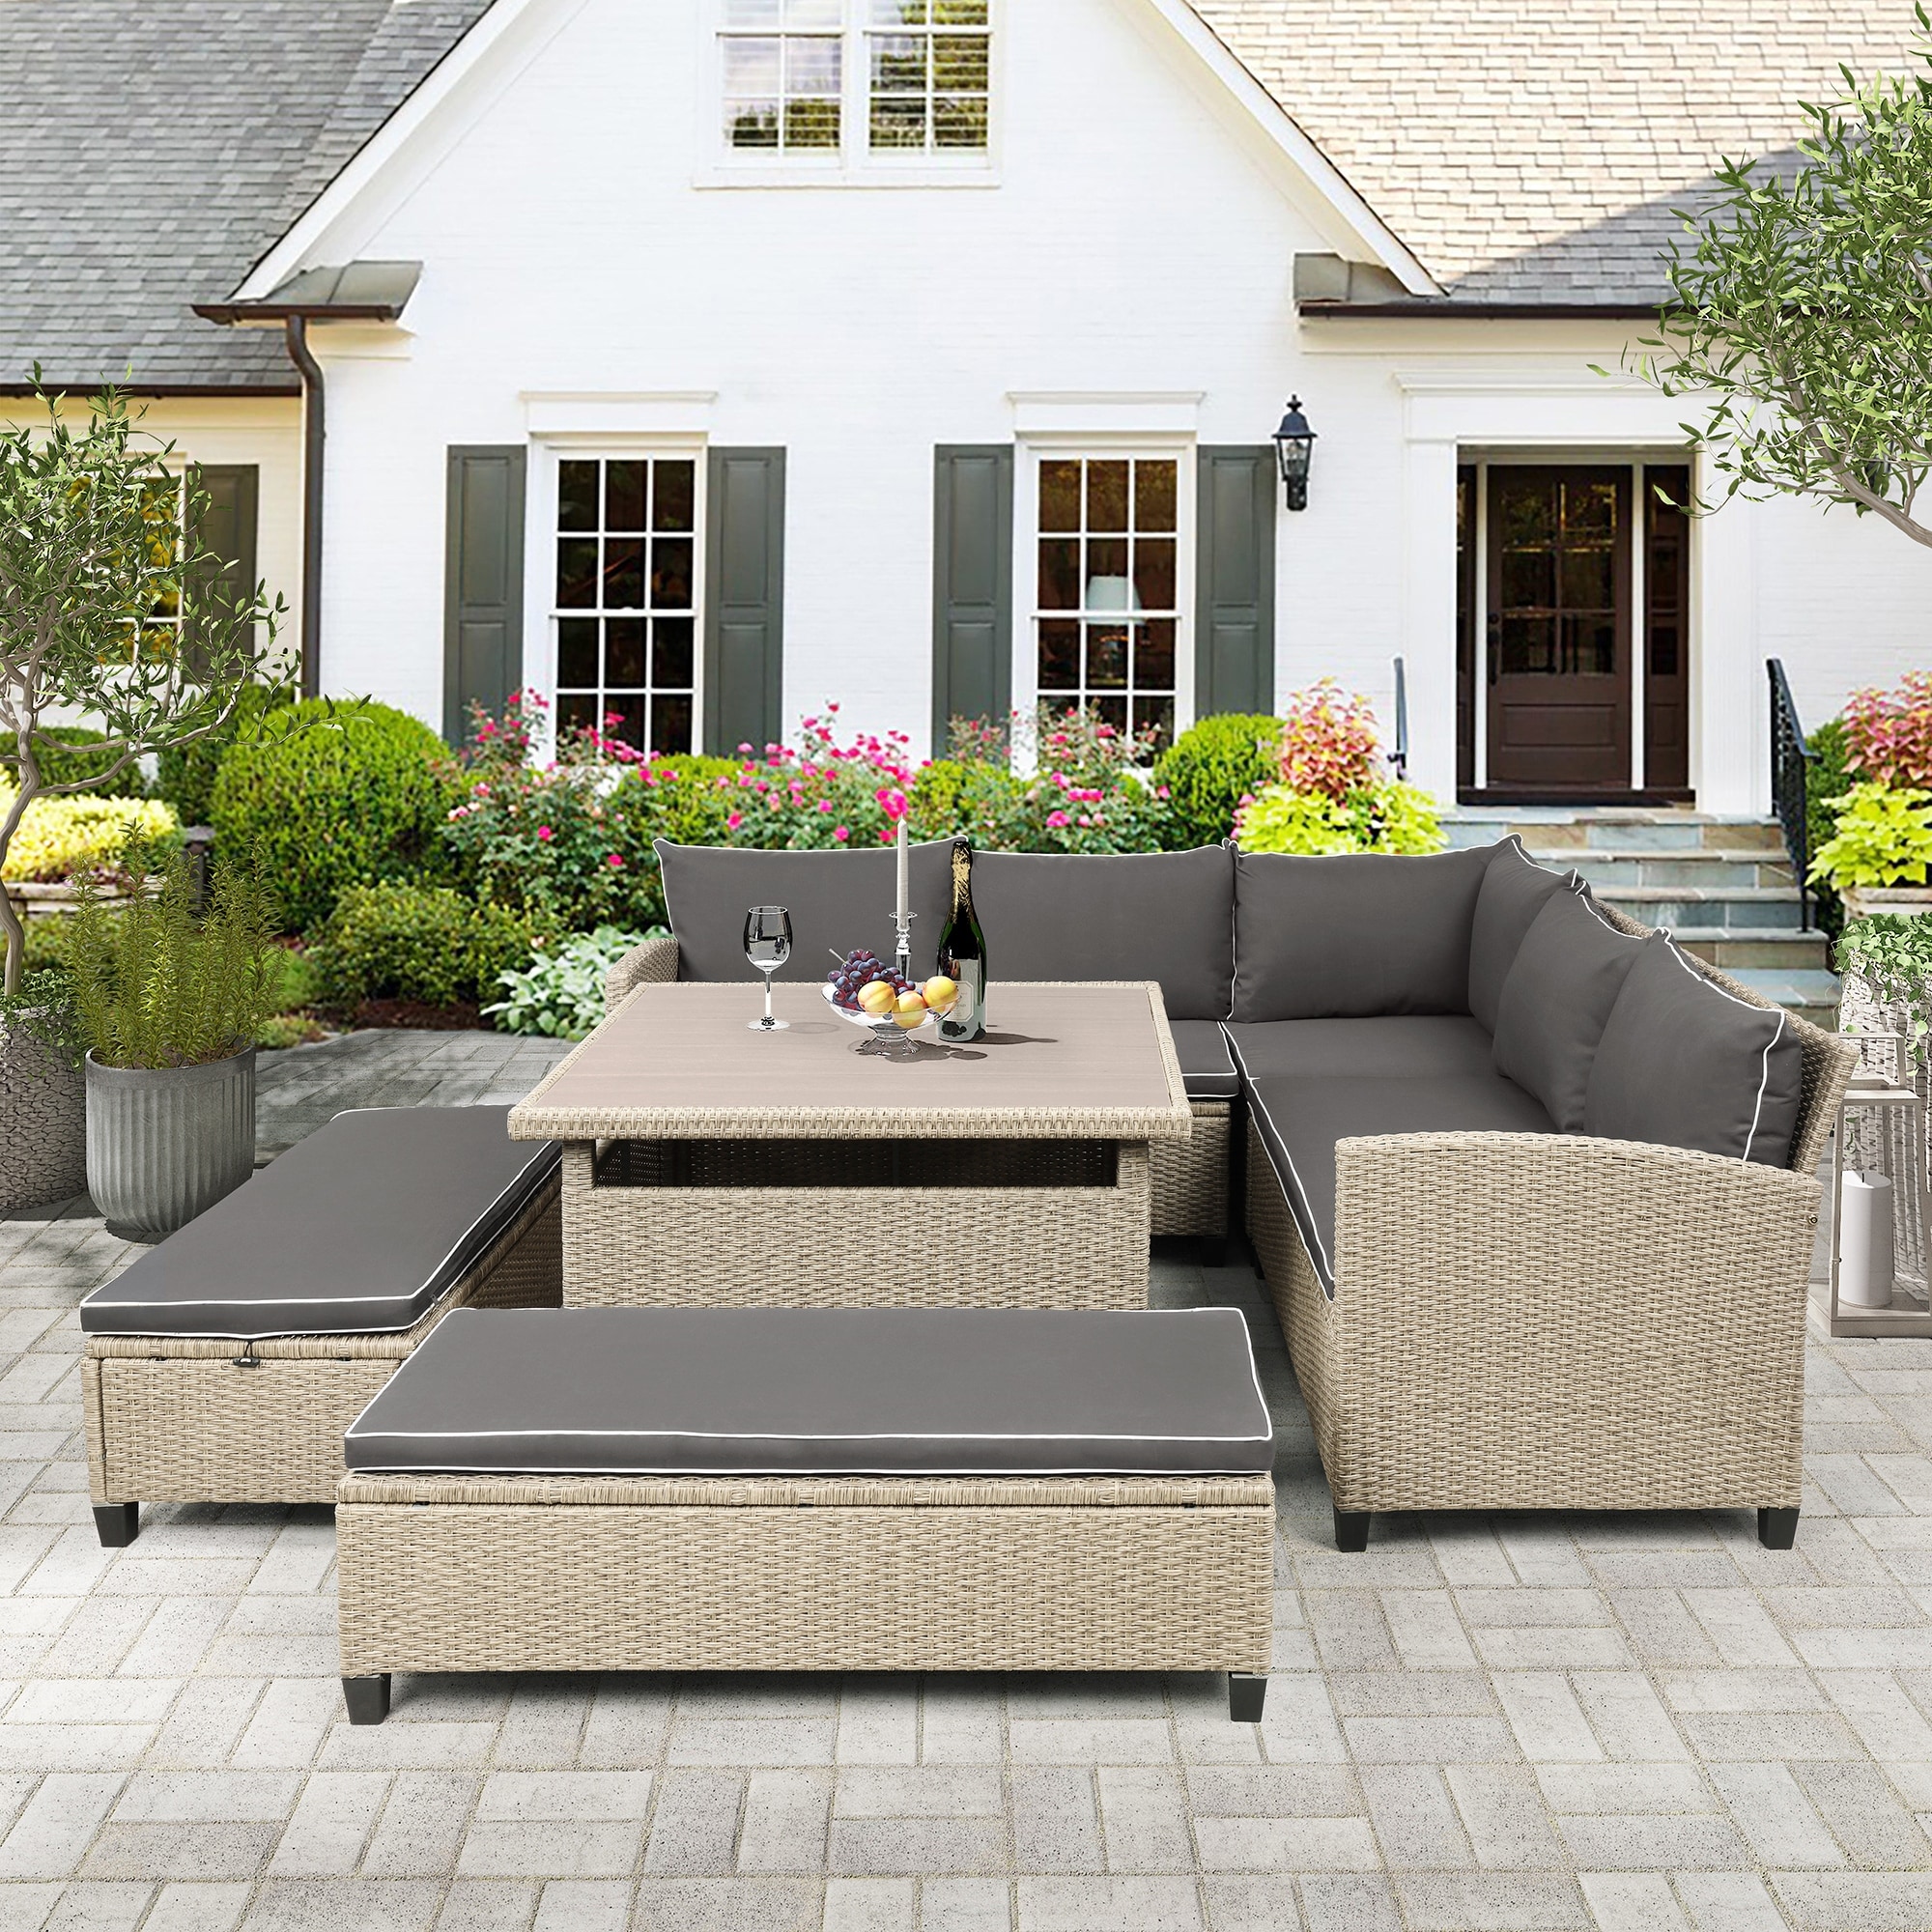 Malwee 6 Piece Outdoor Conversation Set outdoor Wicker Rattan Sectional Sofa With Table And Benches